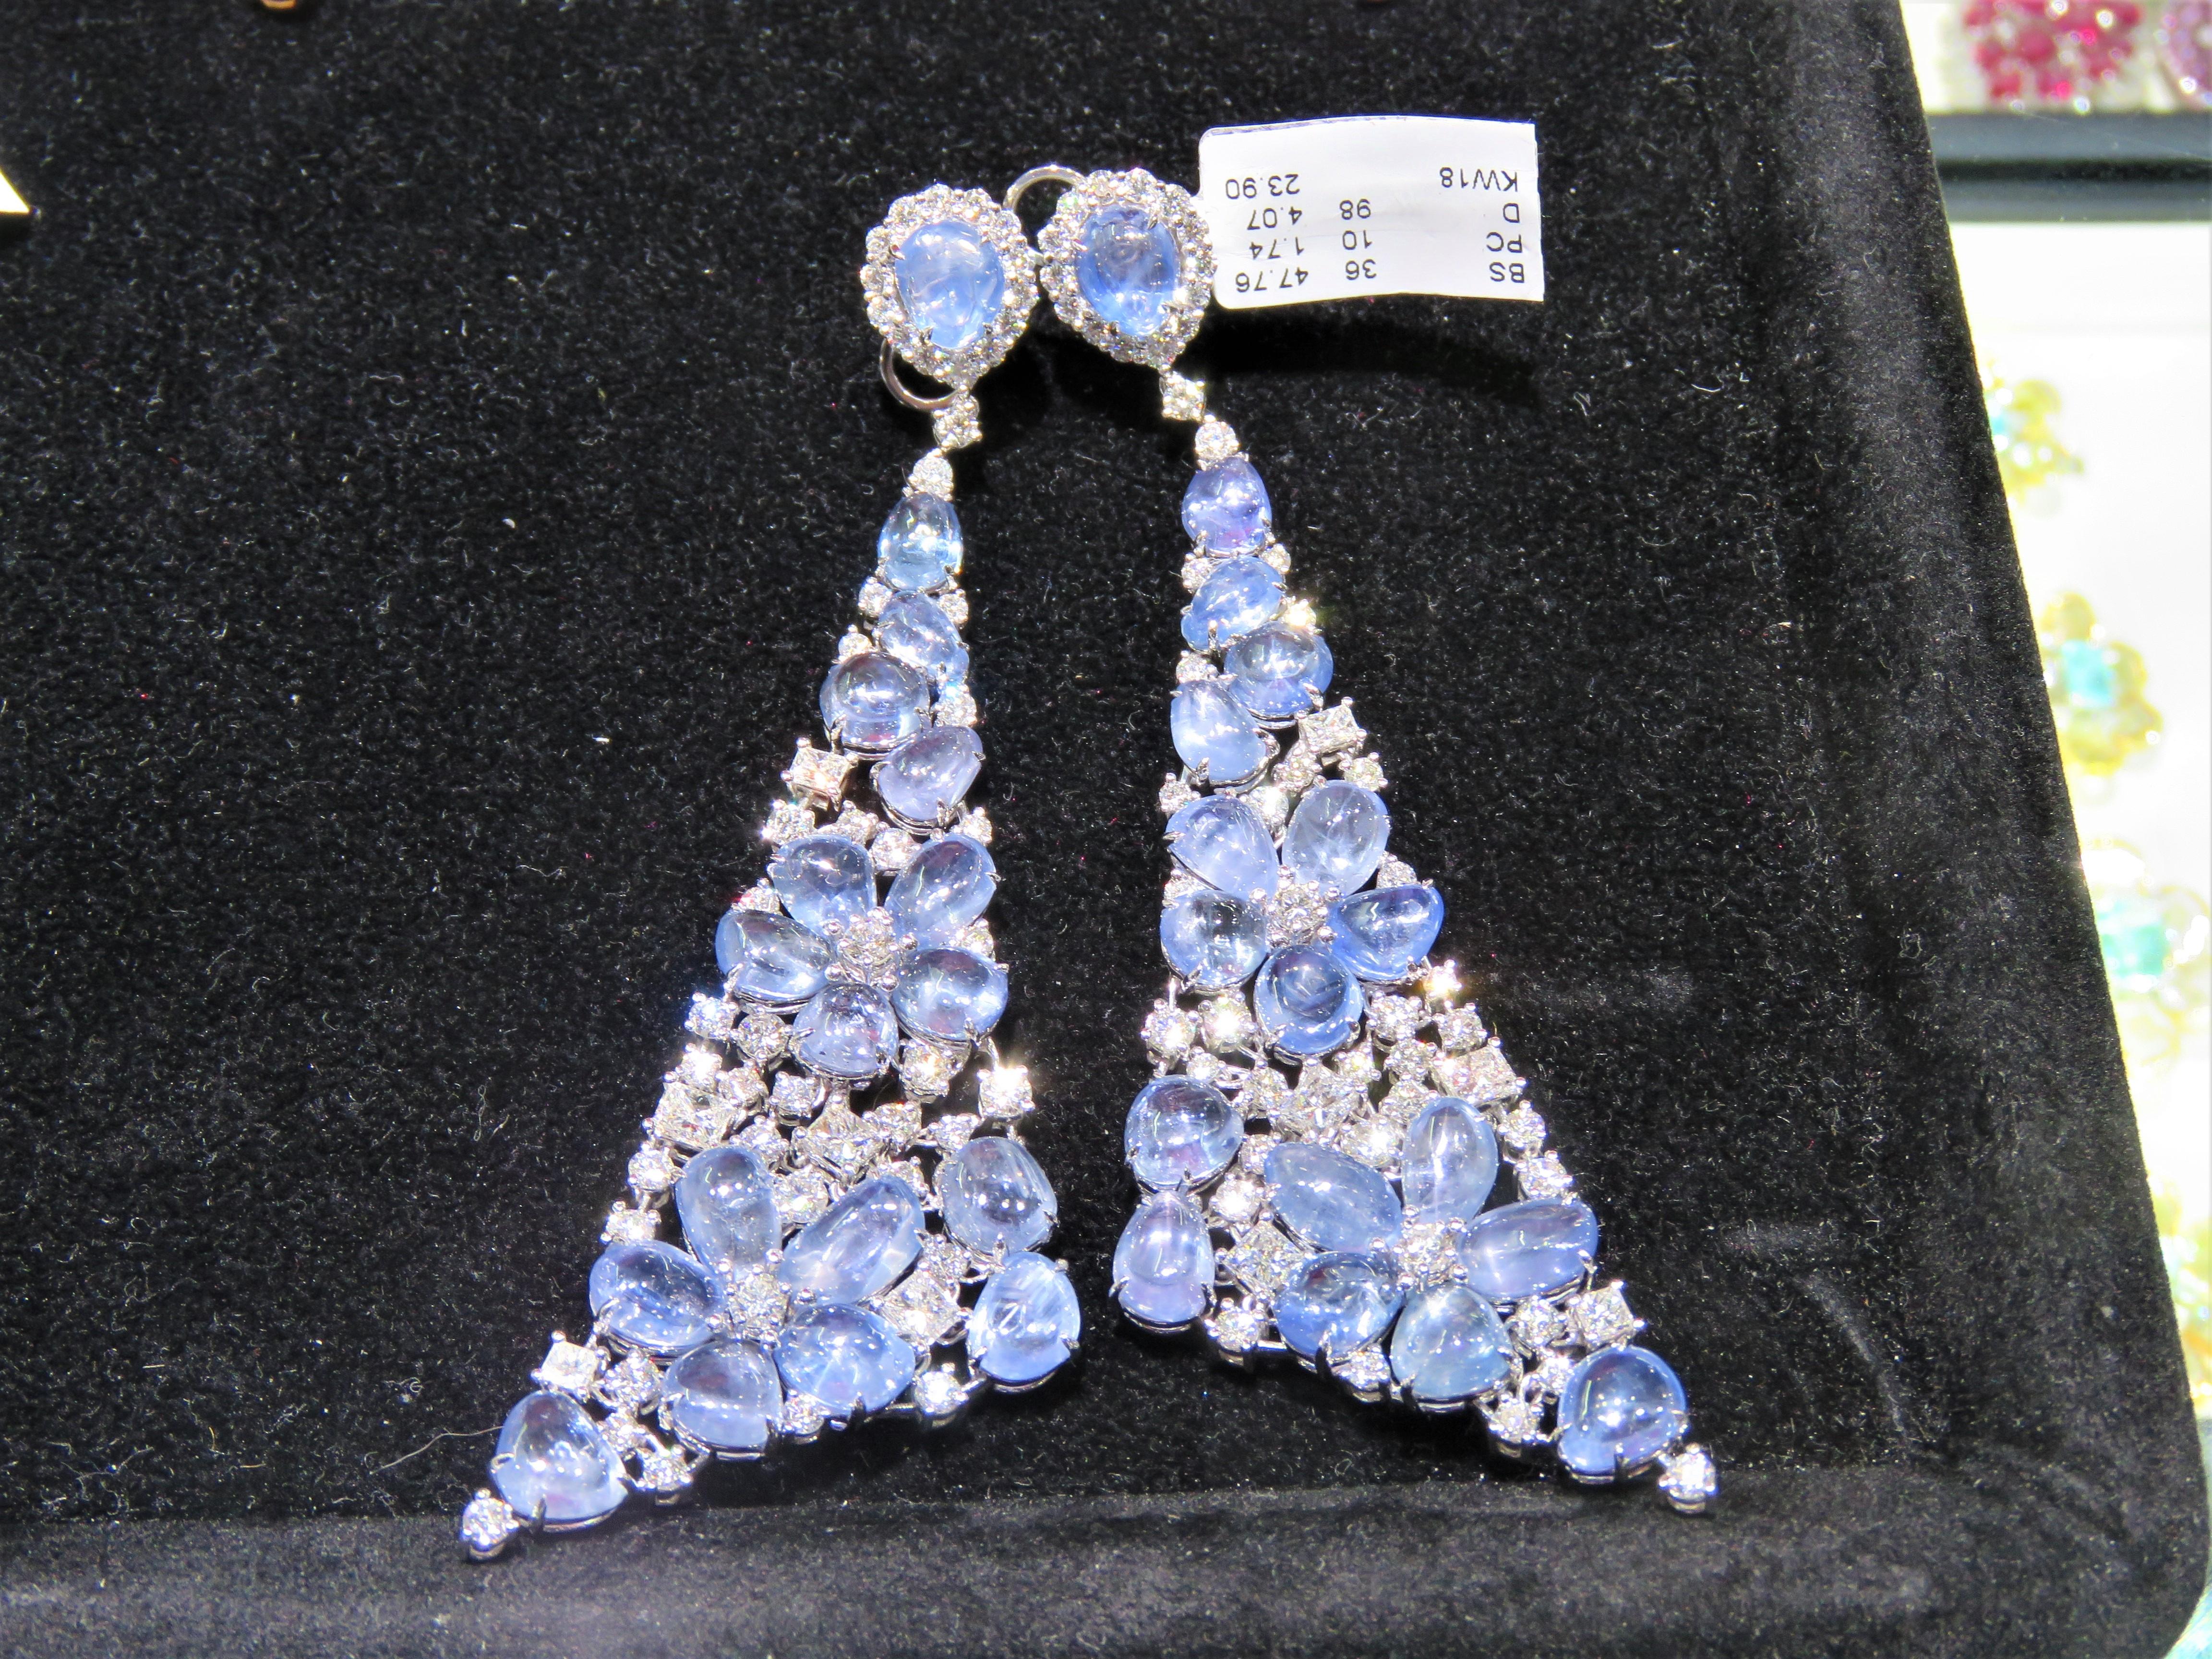 The Following Item we are offering are these Extremely Rare Beautiful 18KT Gold Fine Large Fancy Cabochon Sapphire and White Diamond Dangle Earrings. Each Earring features Rare Gorgeous Glittering Fancy Large Sapphire Cabochons adorned with